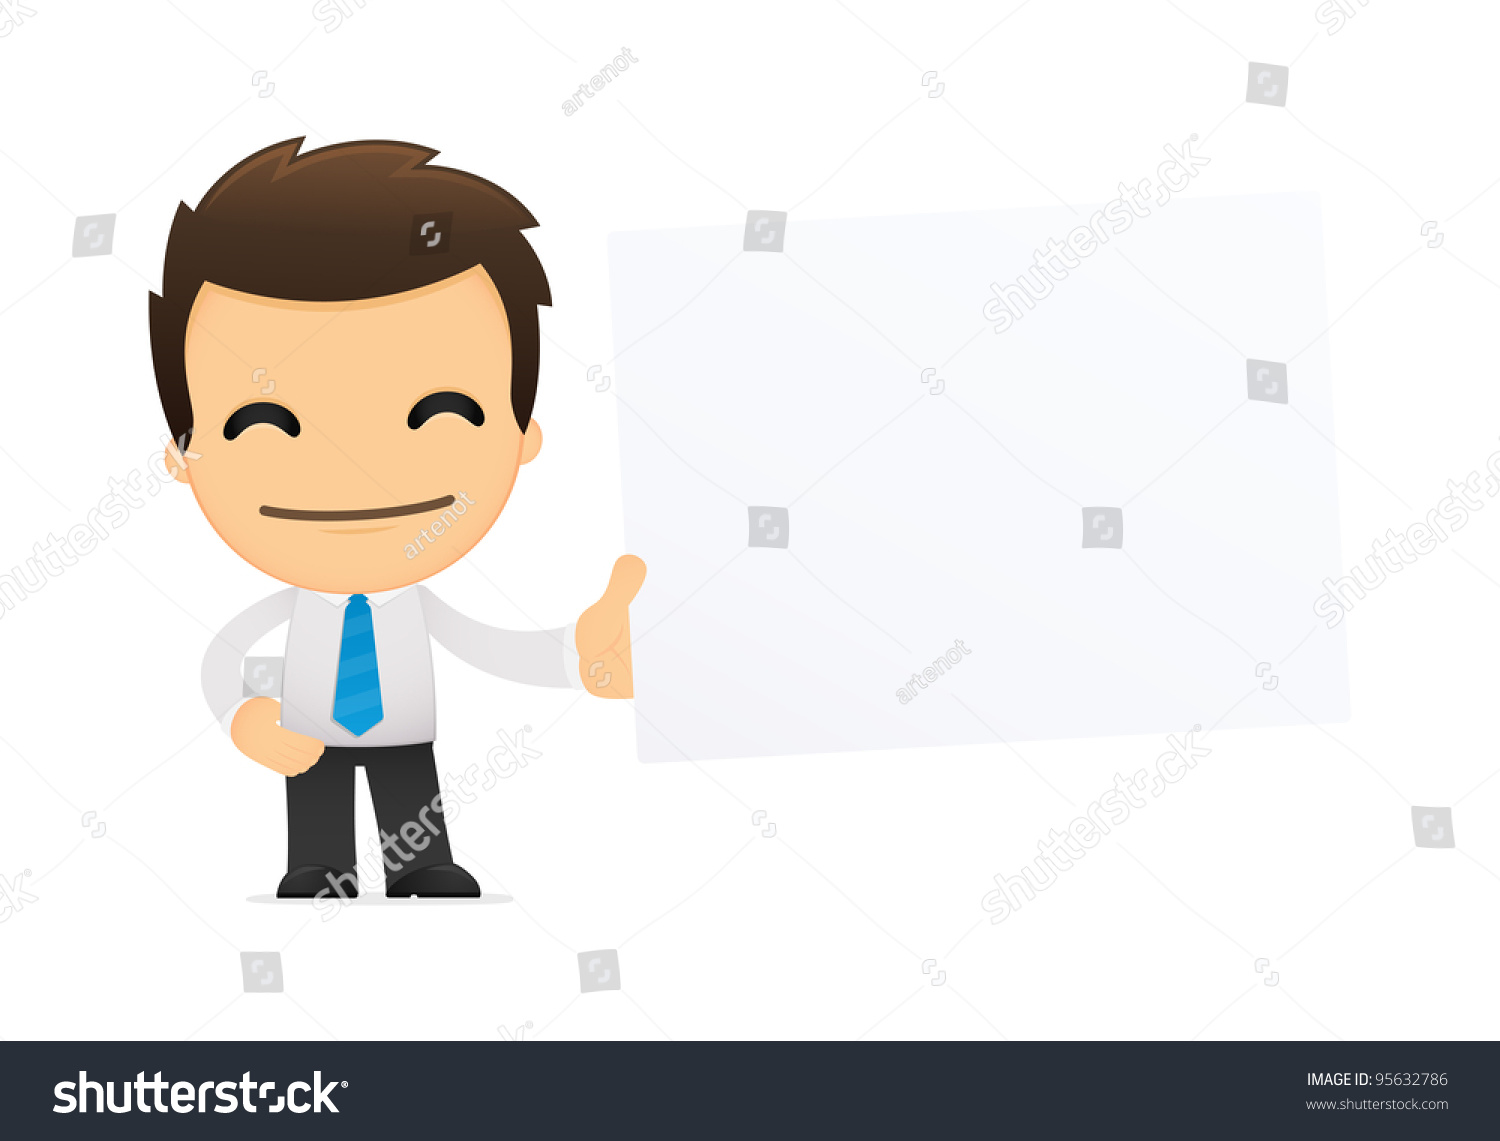 Funny Cartoon Office Worker In Various Poses For Use In Advertising